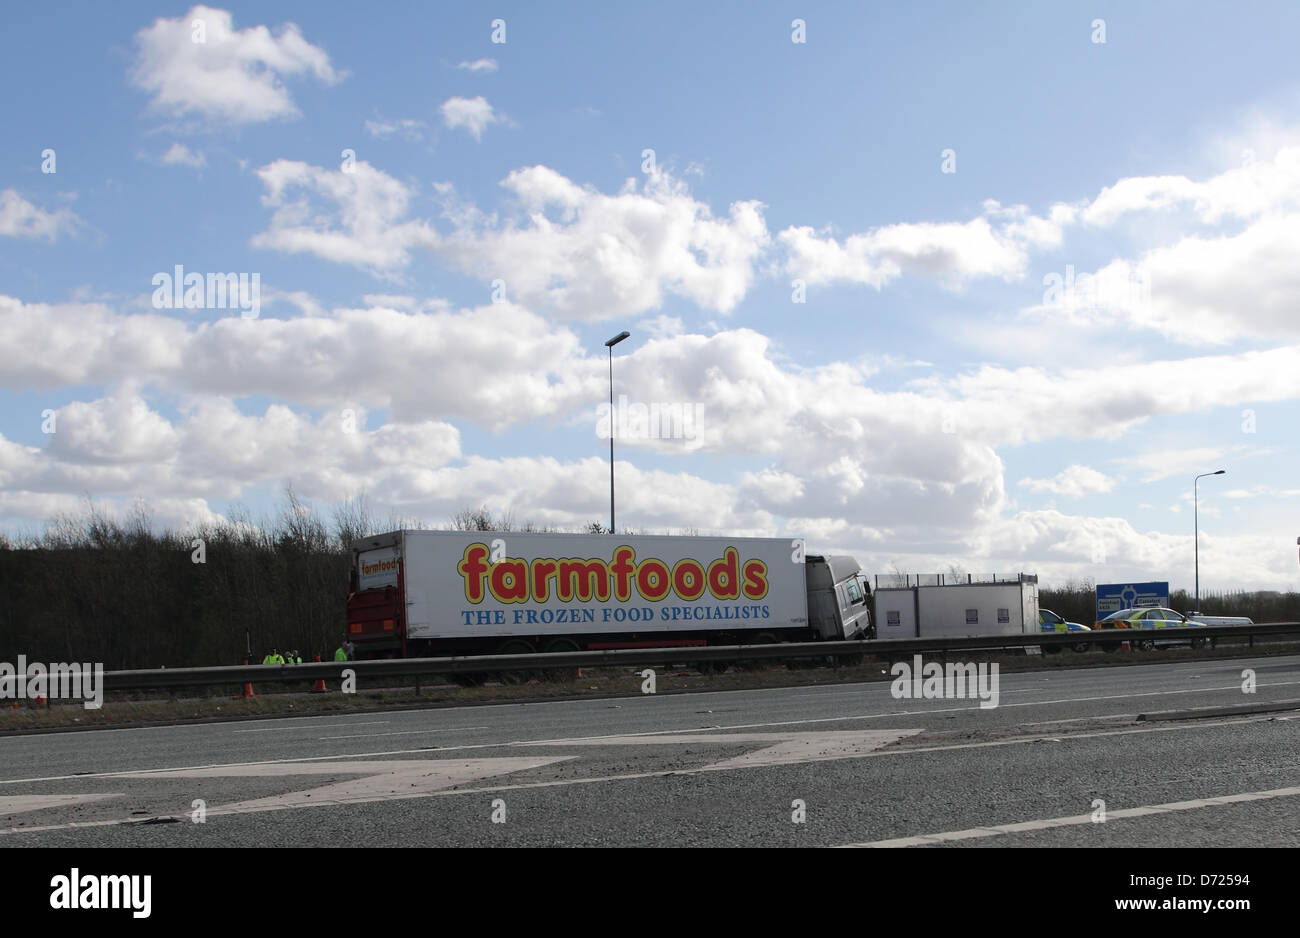 West Yorkshire, UK. 26th April 2013. Junction 32 of the M62 near Pontefract is the scene of a fatal road accident involving a Farmfoods lorry and a mini bus, one female passenger of the mini bus killed and 20 others injured. Credit: Bojangles/Alamy Live News Stock Photo